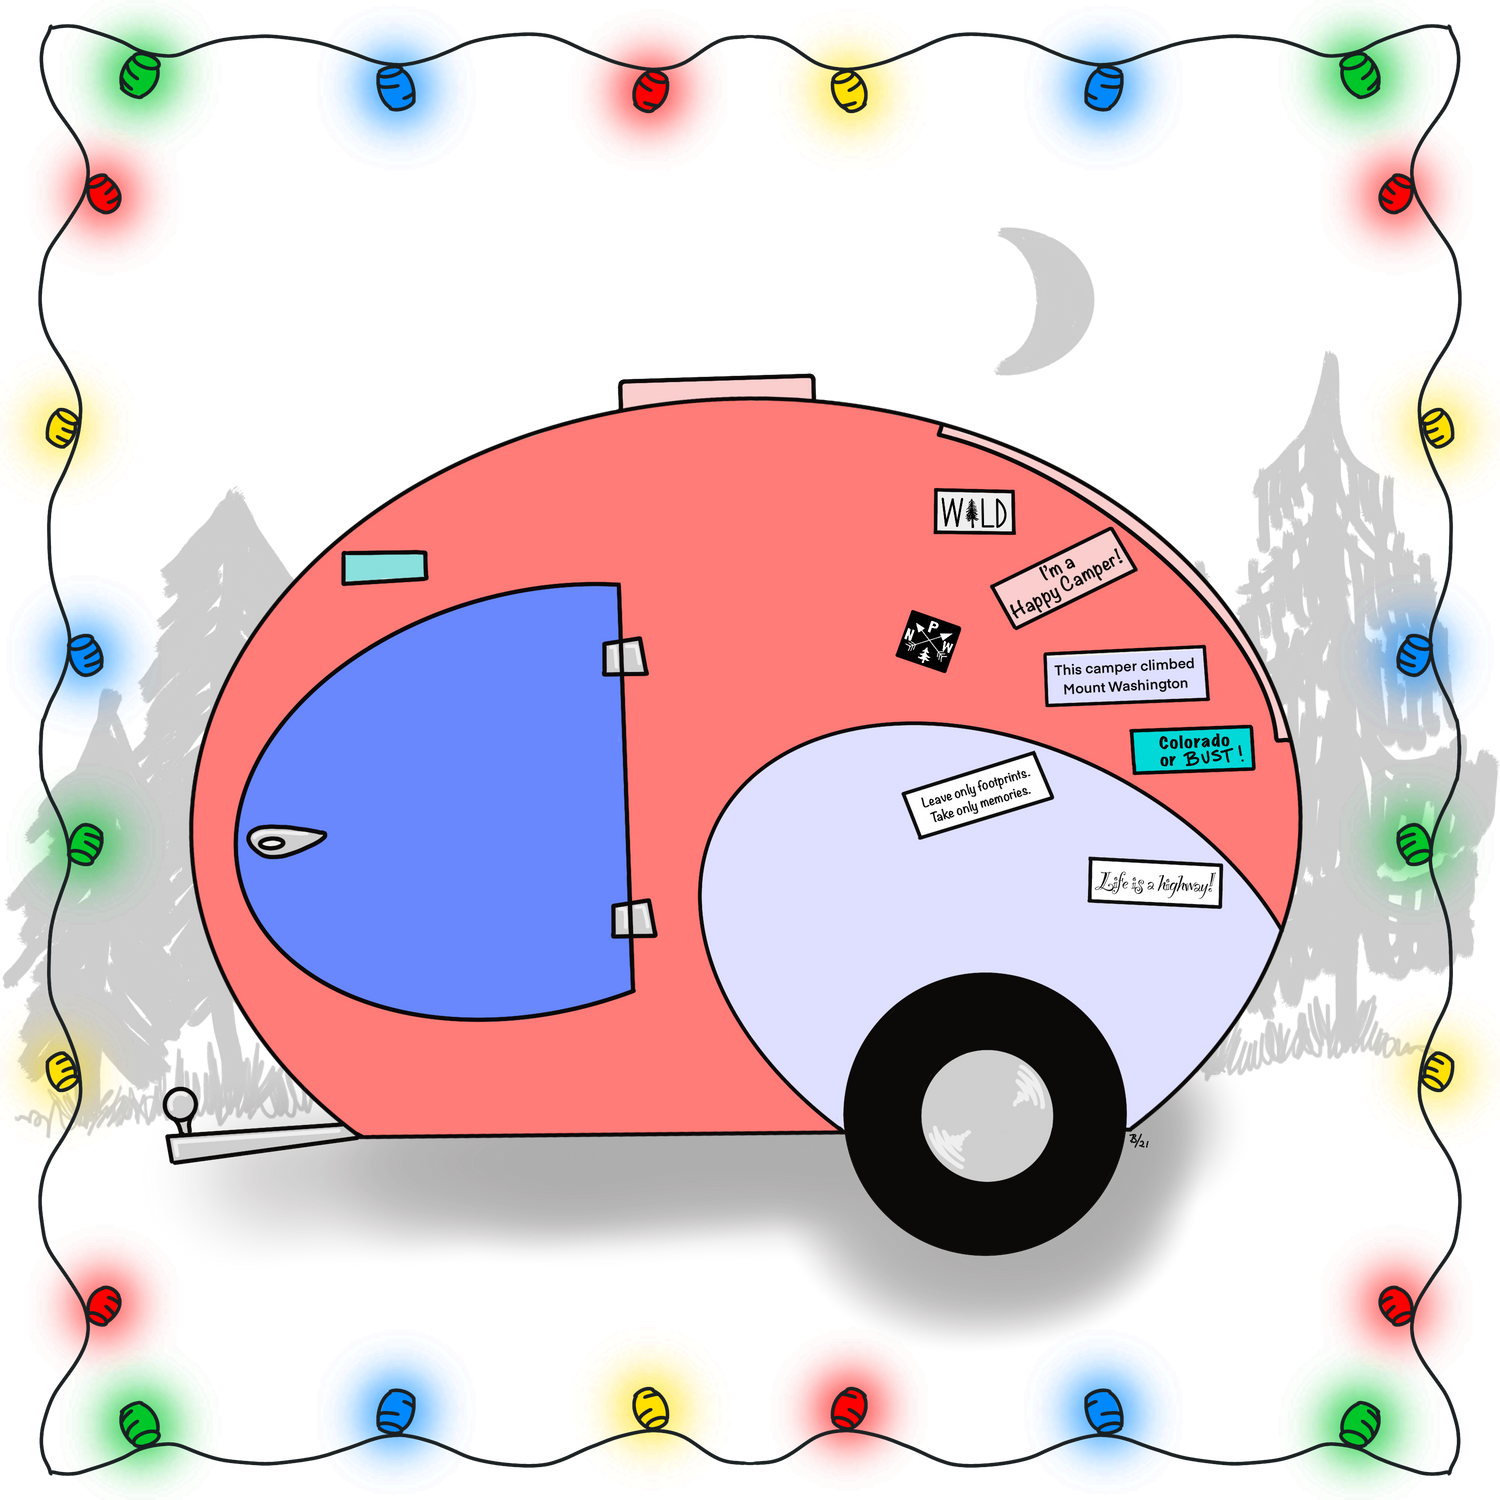 An ode to those who camp! A sneak peek into the creating of the The Camper Collection. A digital illustration of an egg shaped camper complete with travel stickers! Artwork by Bridget M. Designs.